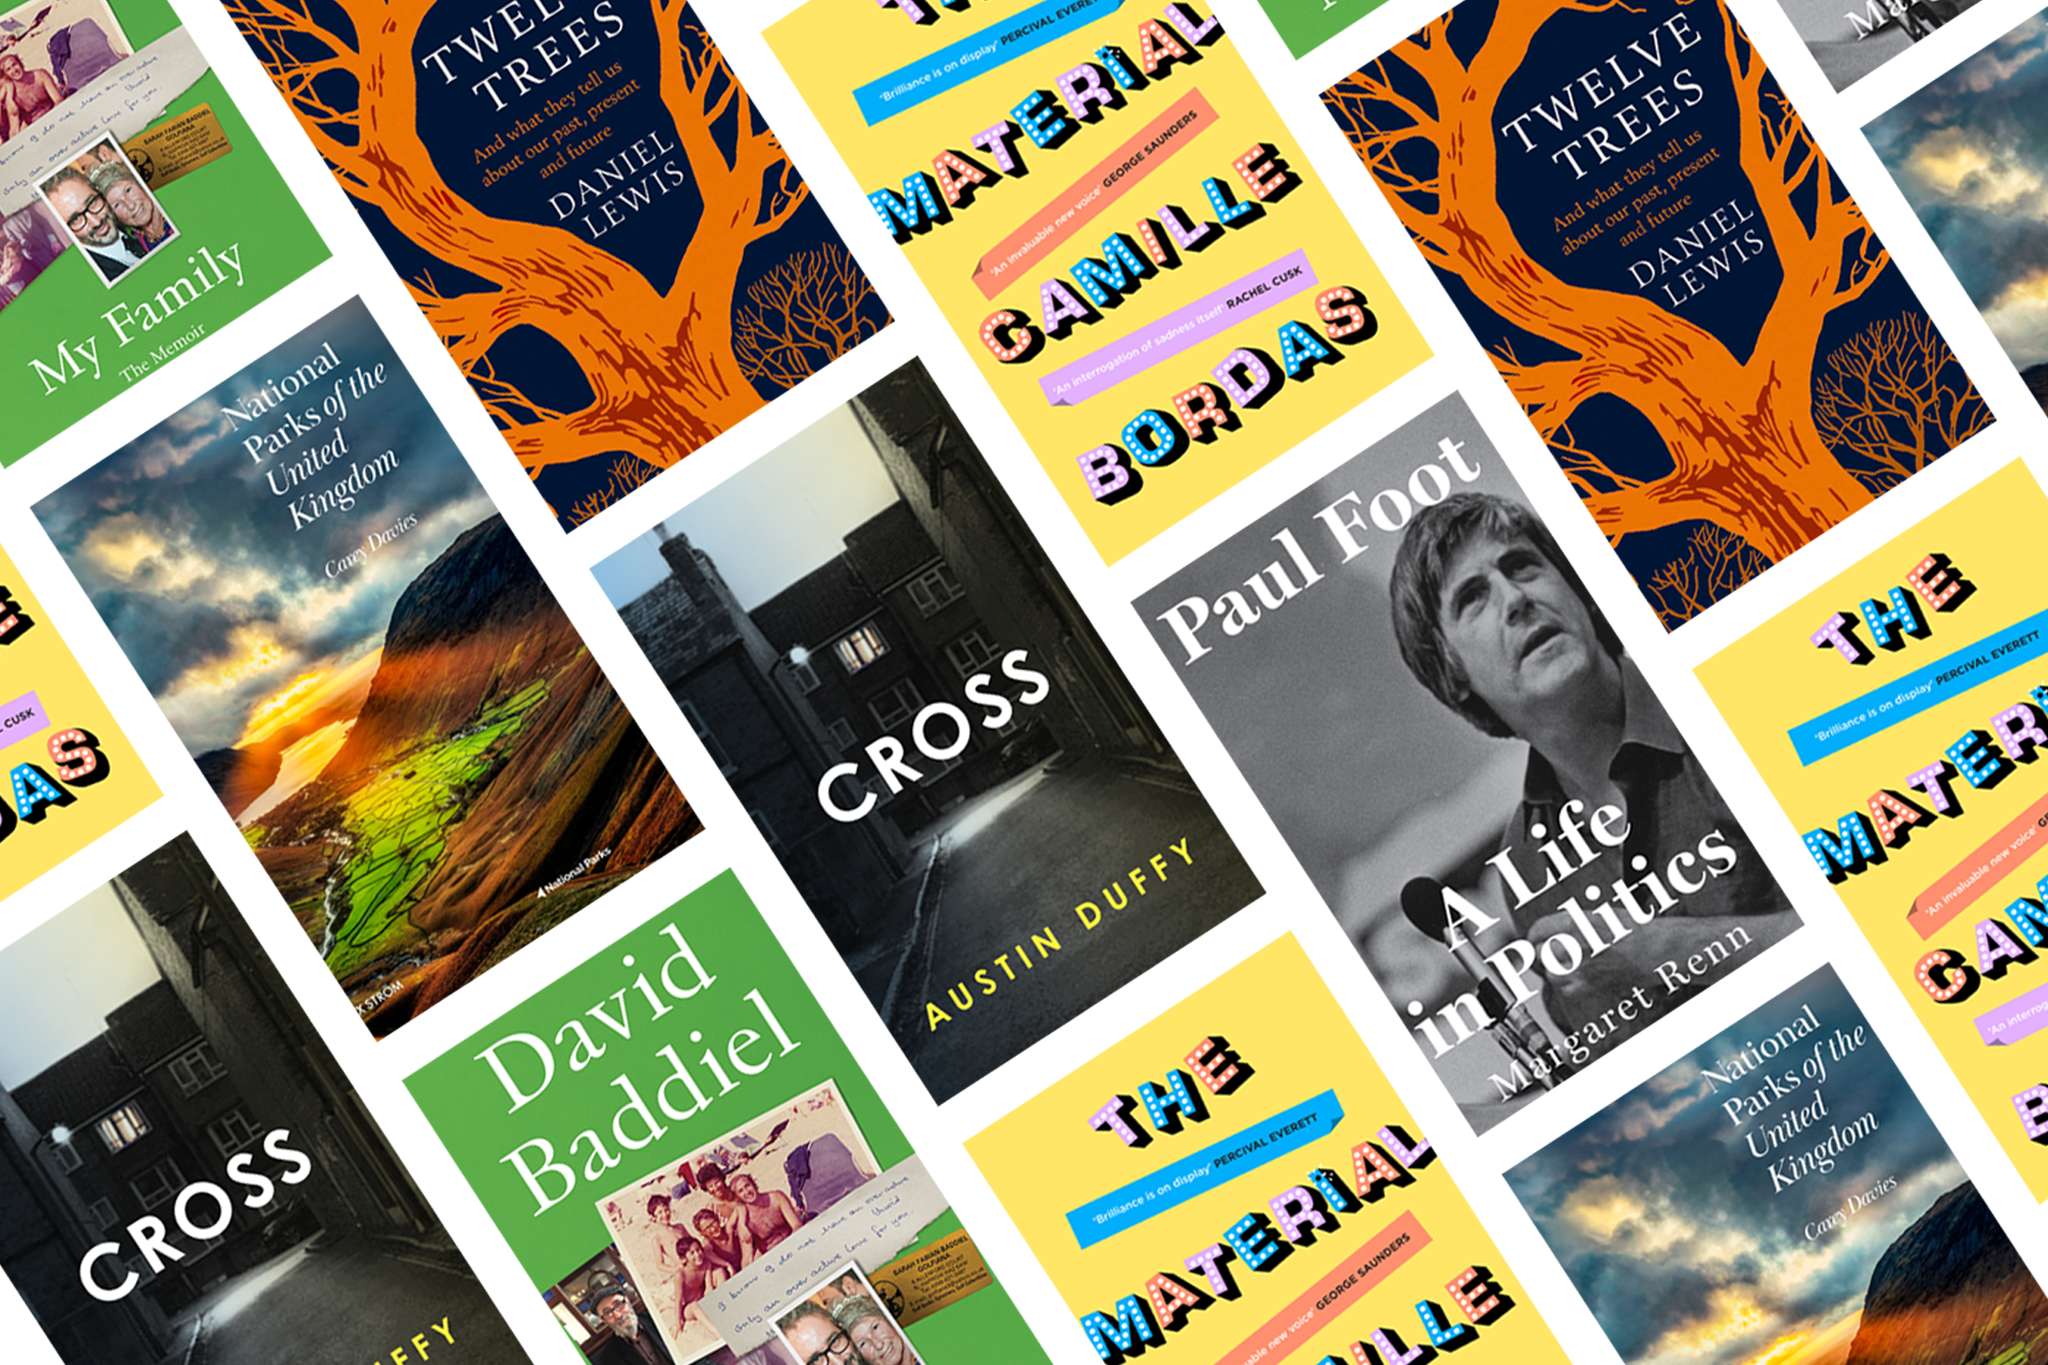 July’s best books include novels by Camille Bordas and Austin Duffy and non-fiction about trees and parks